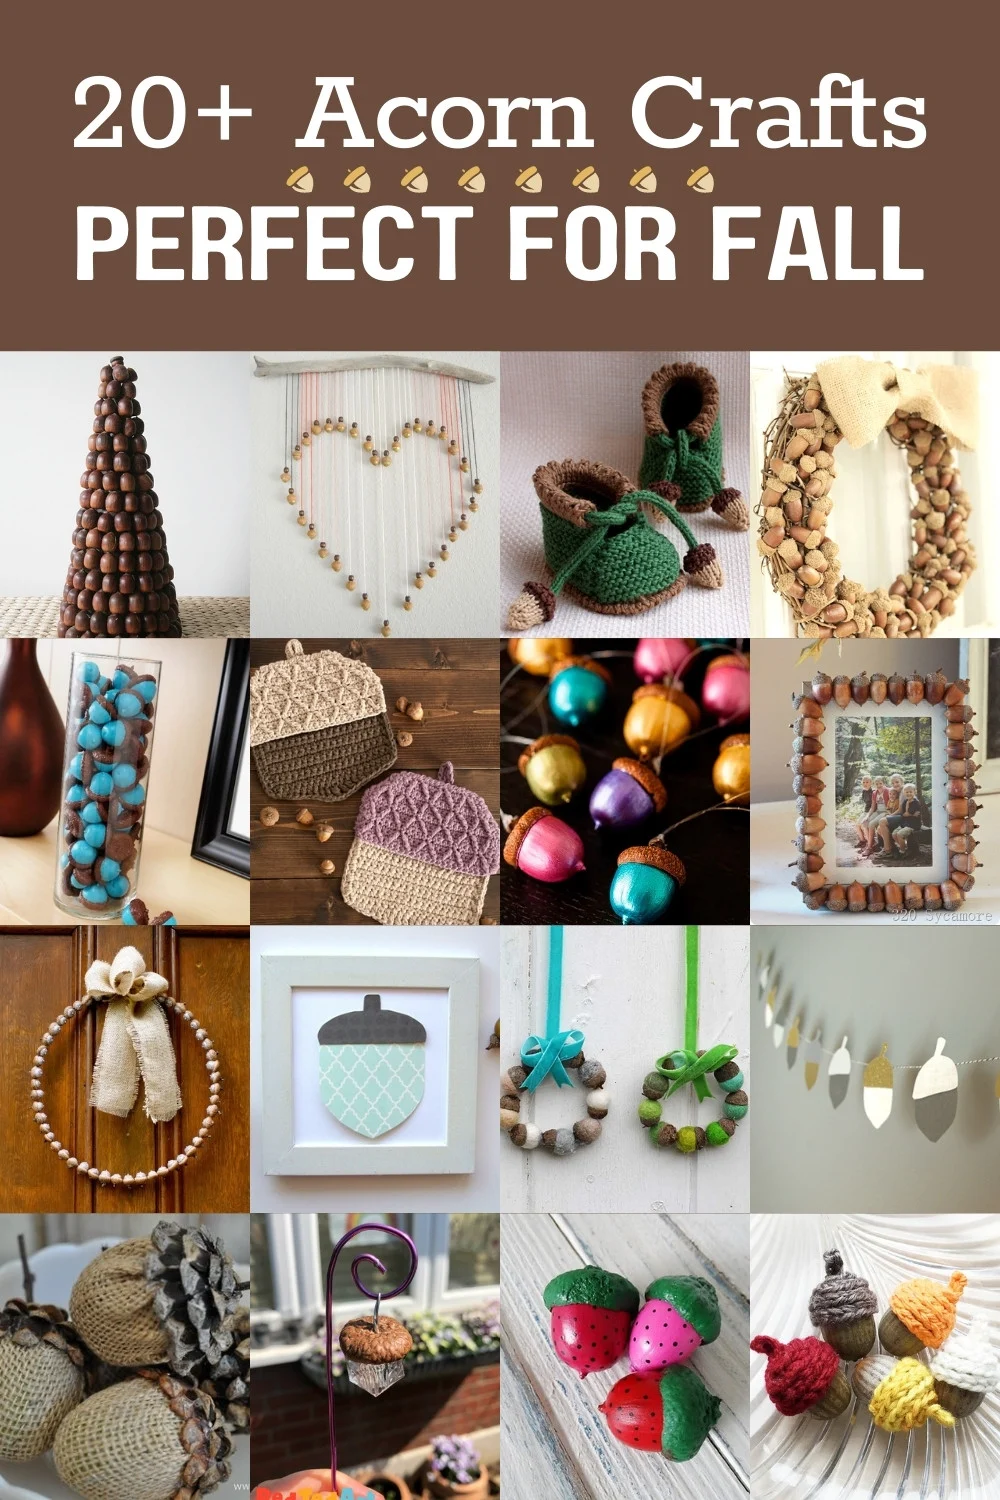 Over 20 Acorn Crafts Perfect for Fall